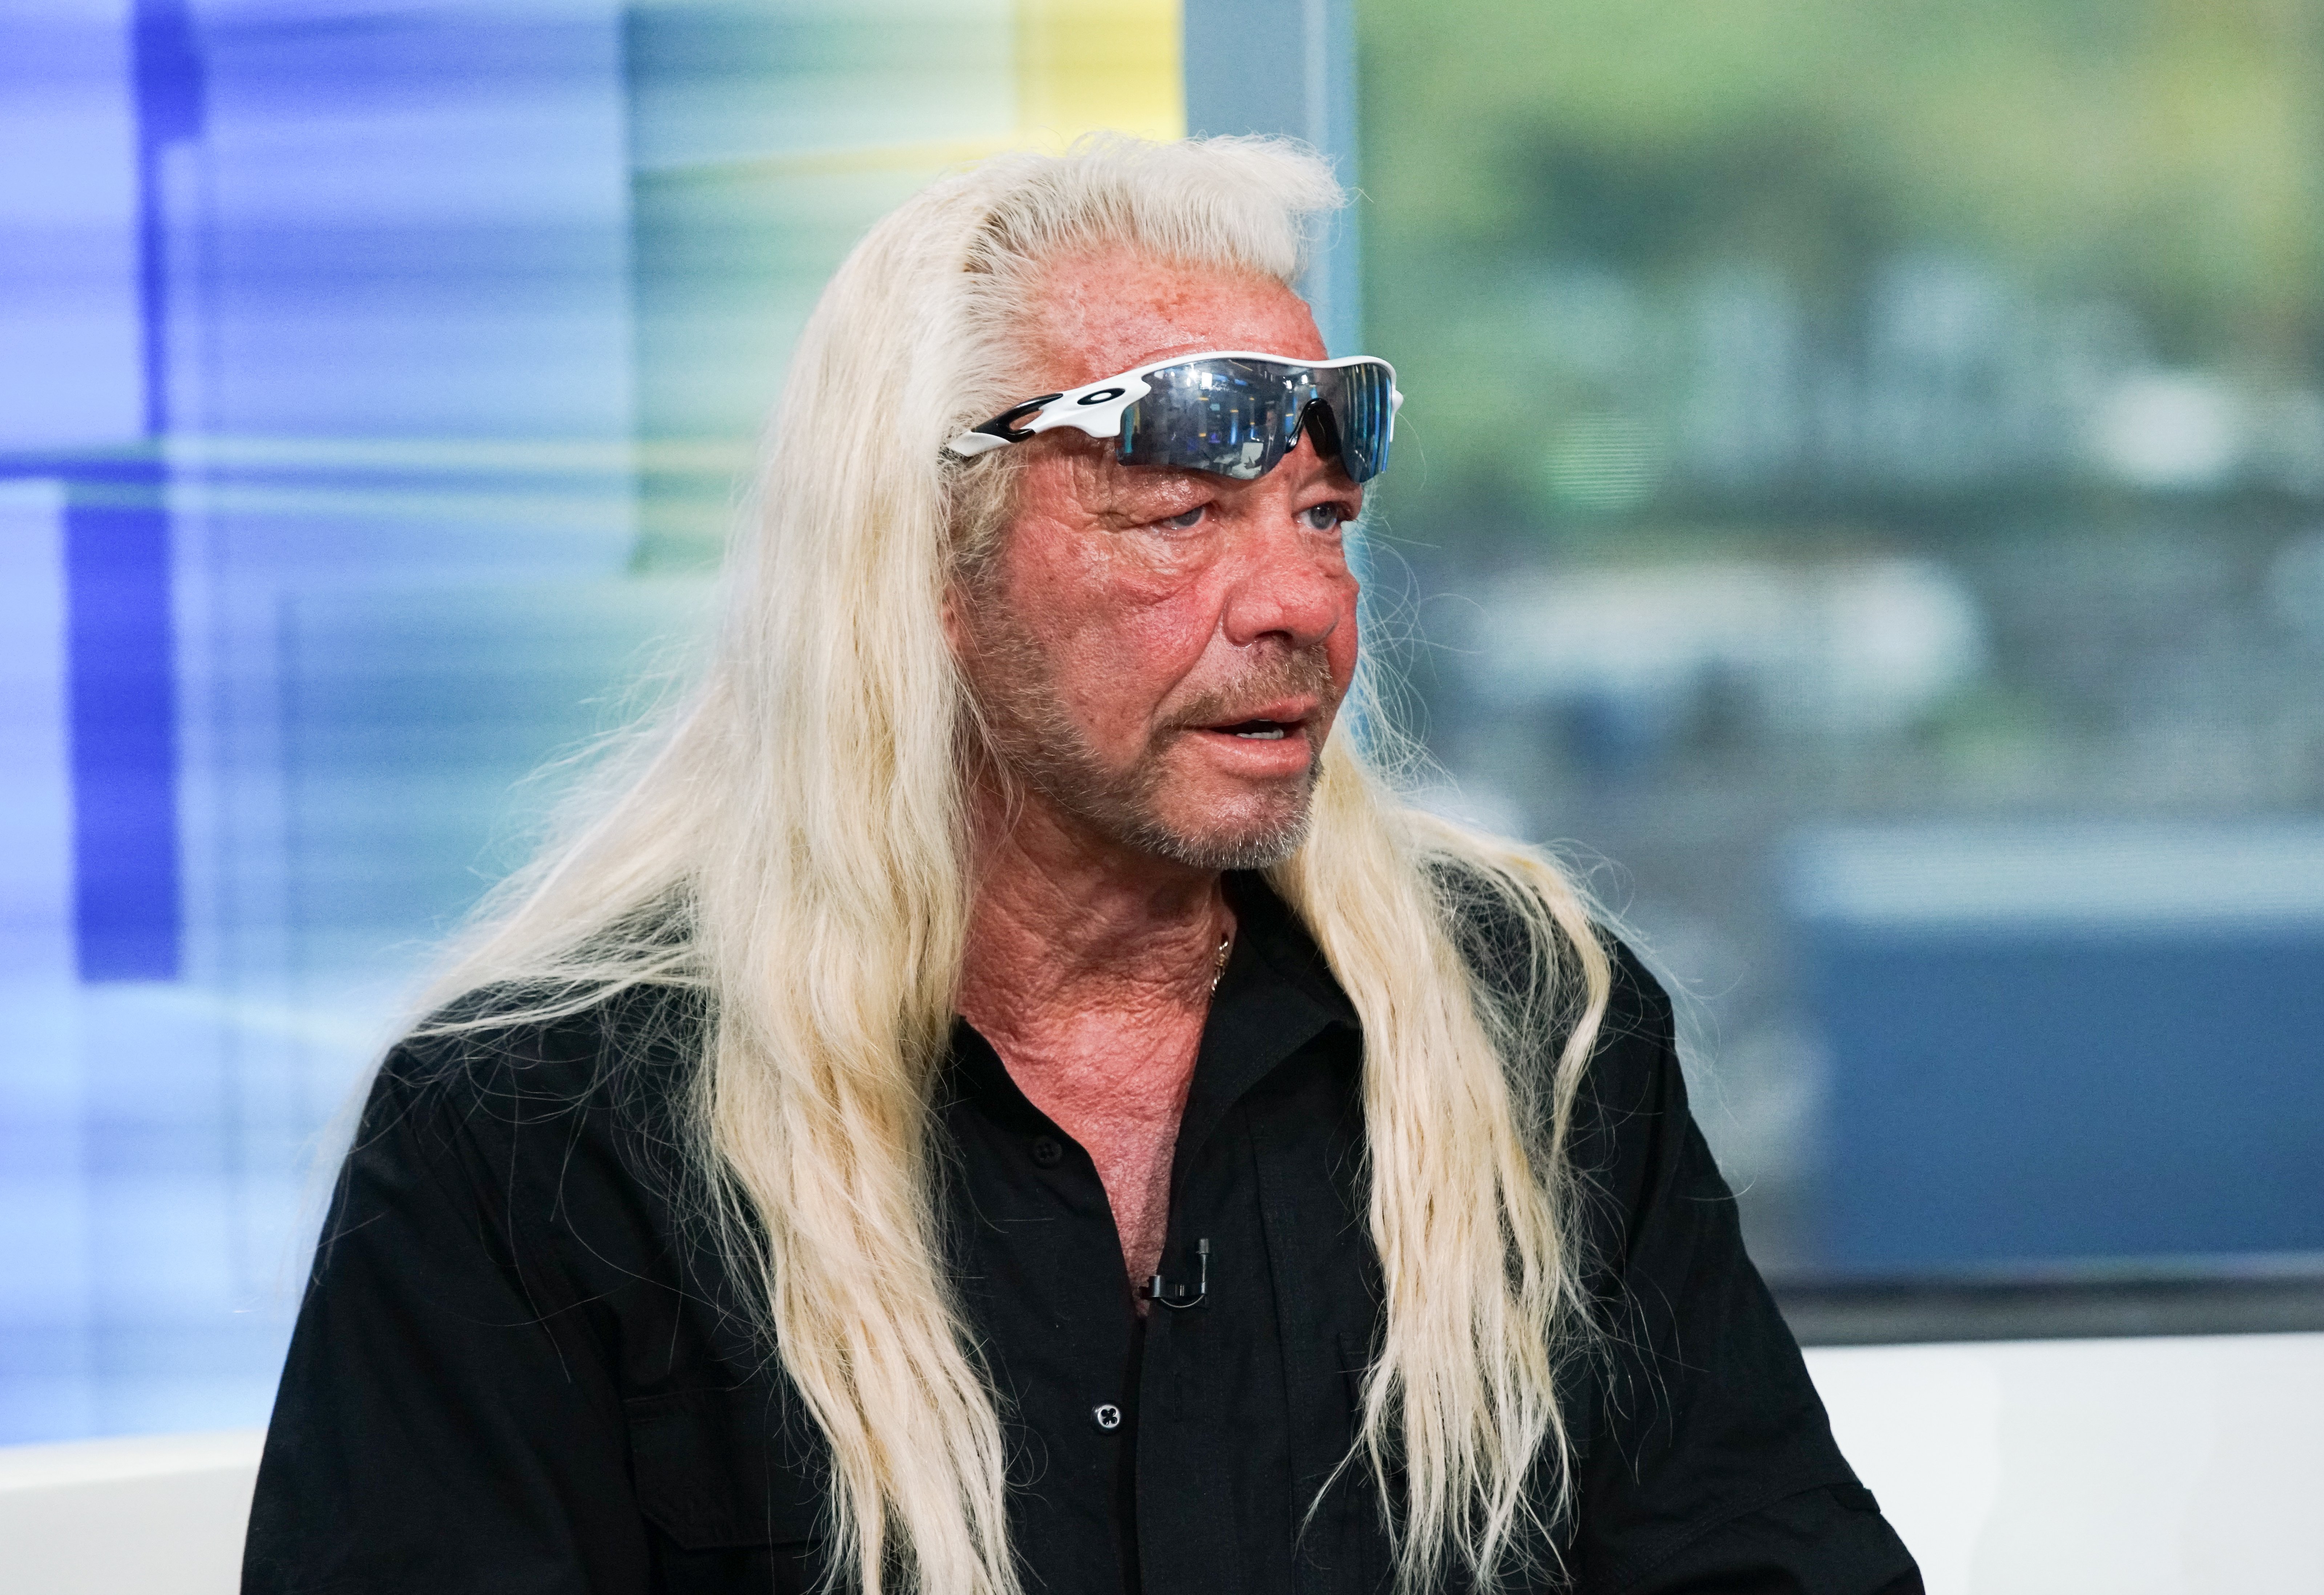 Duane Chapman visits "FOX & Friends" at FOX Studios on August 28, 2019 in New York City | Photo: Getty Images